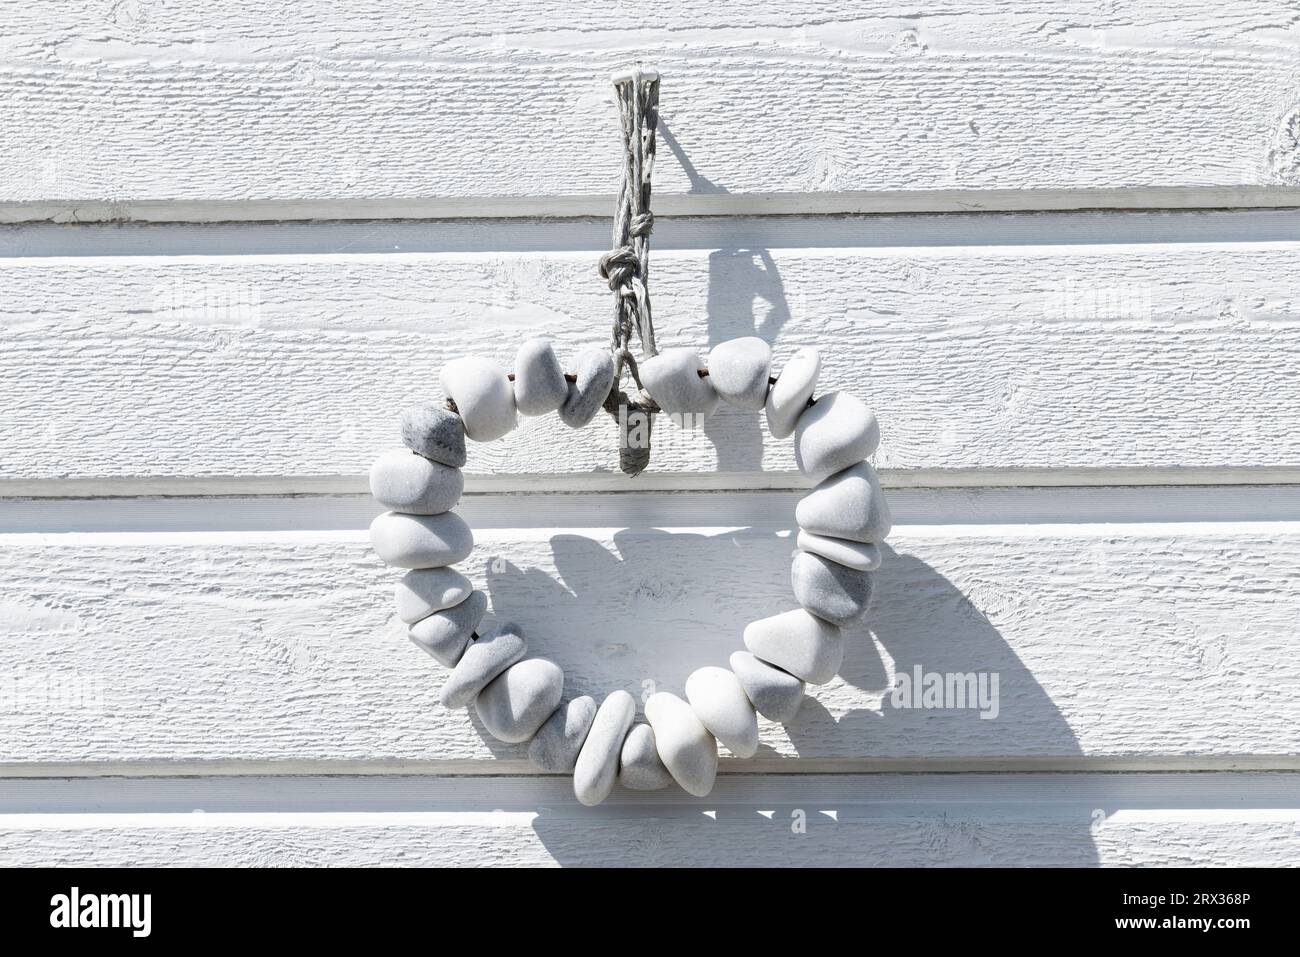 Heart-shaped string of white pebbles in front of the white wooden facade of a bathing hut on the beach of Skanör med Falsterbo, Skåne, Sweden Stock Photo